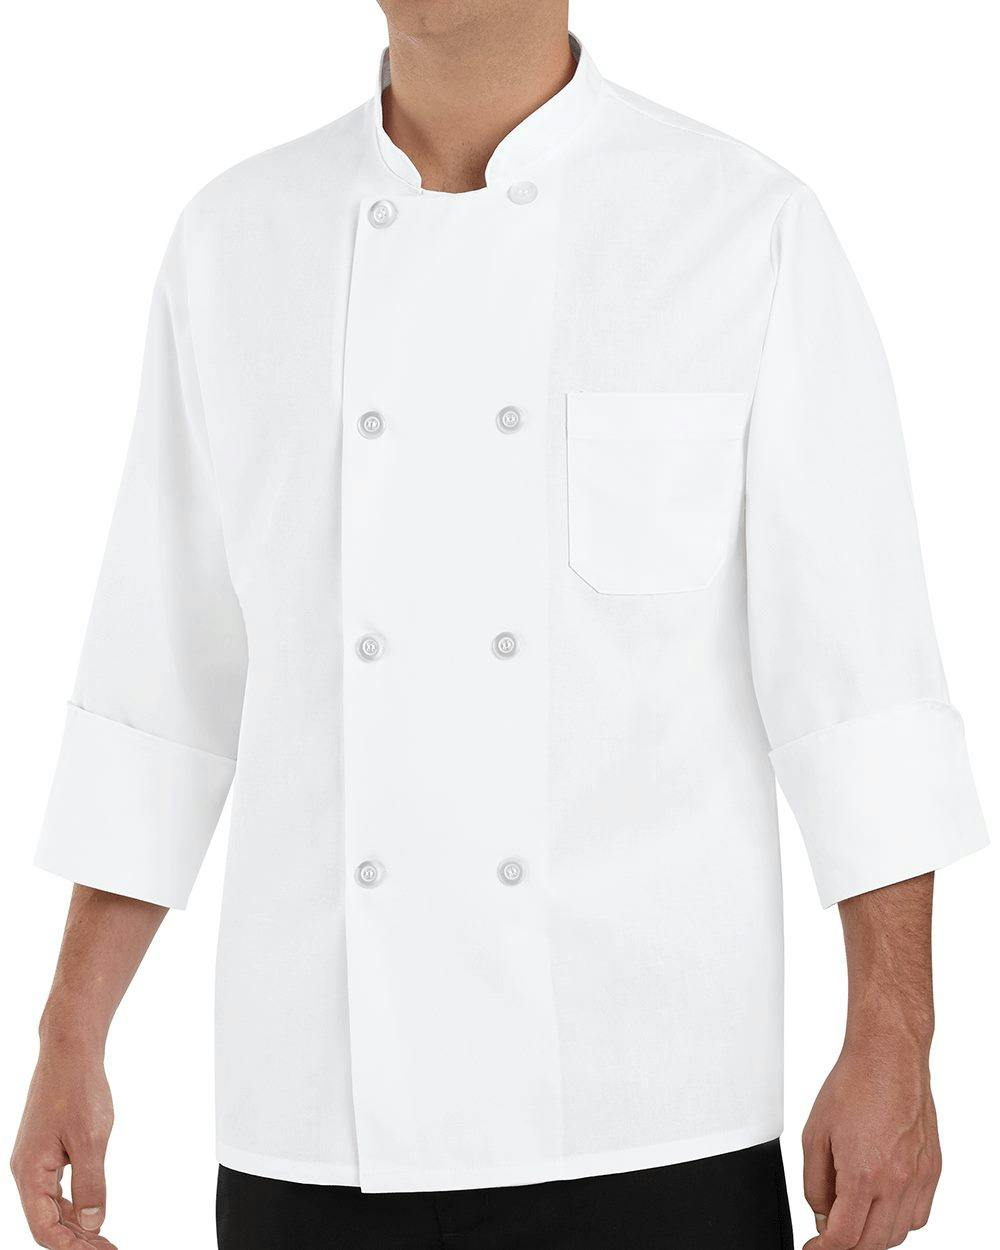 Image for Eight Pearl Button Chef Coat - Tall Sizes - 0403T